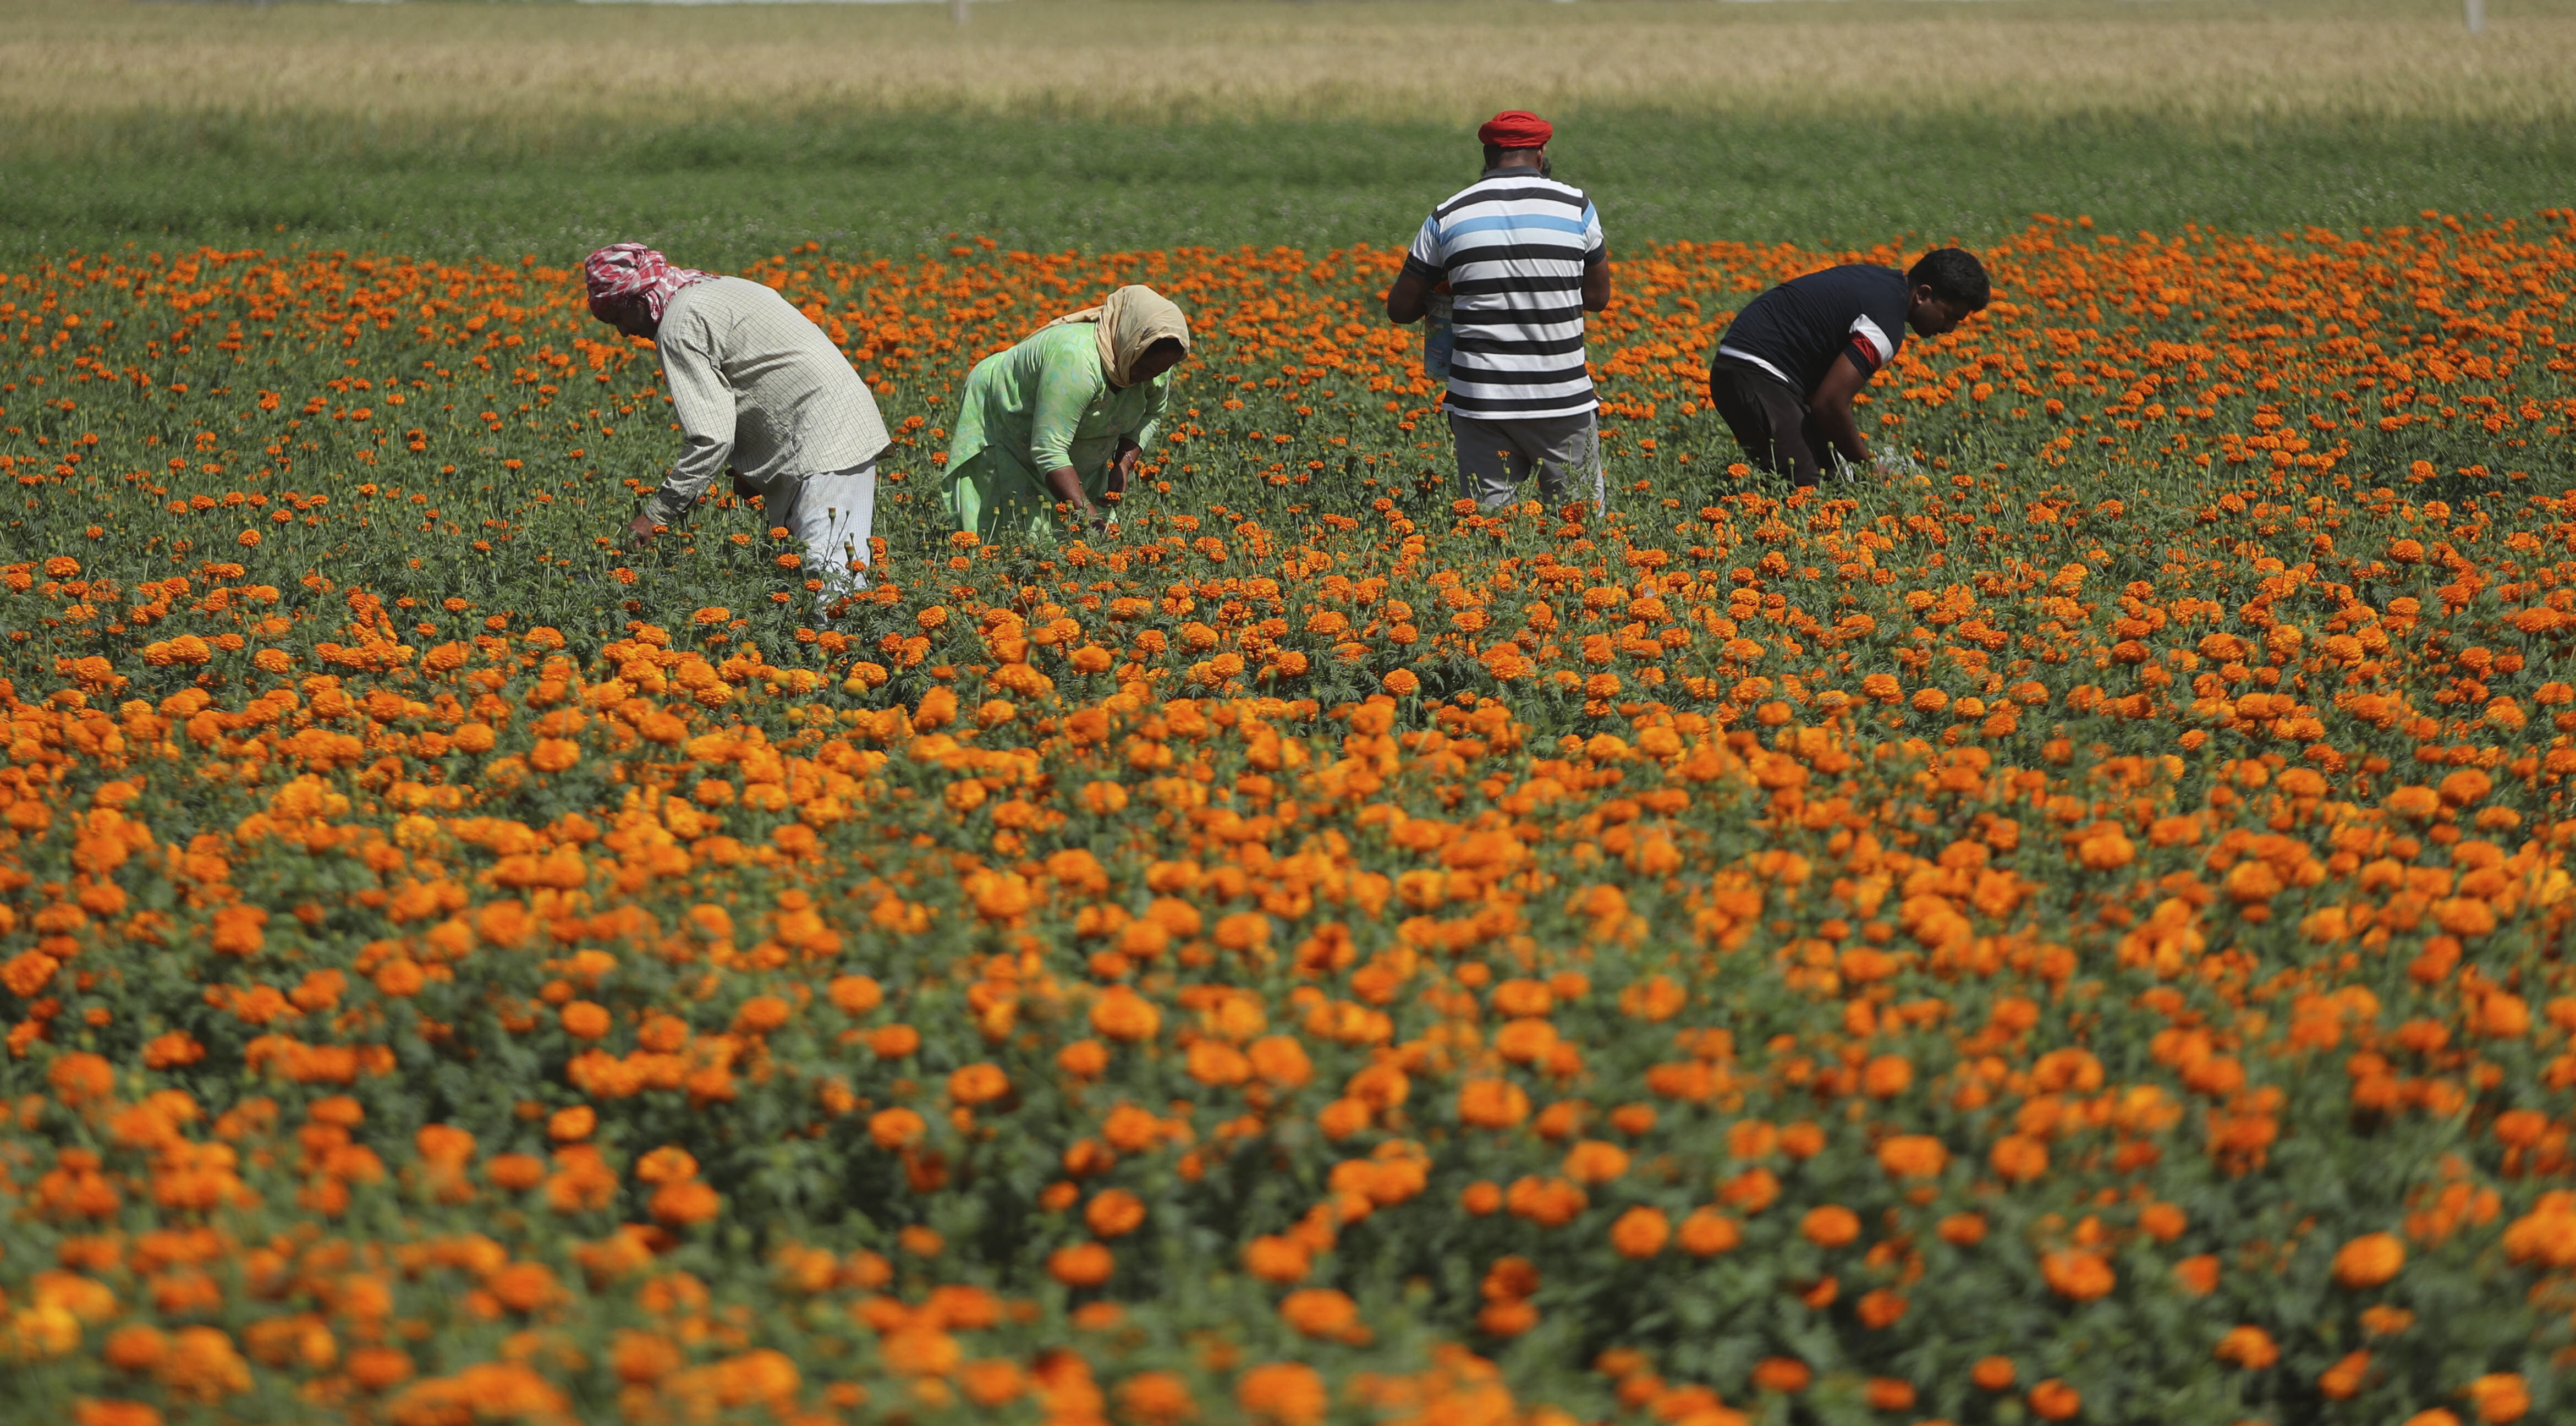 Indian farmers collect waste marigold flowers before dumping them in their farm during lockdown on the outskirts of Jammu, India, Wednesday, April 22, 2020. India has reported nearly 20,000 confirmed cases of COVID-19 and over 600 deaths. (AP Photo/ Channi Anand)